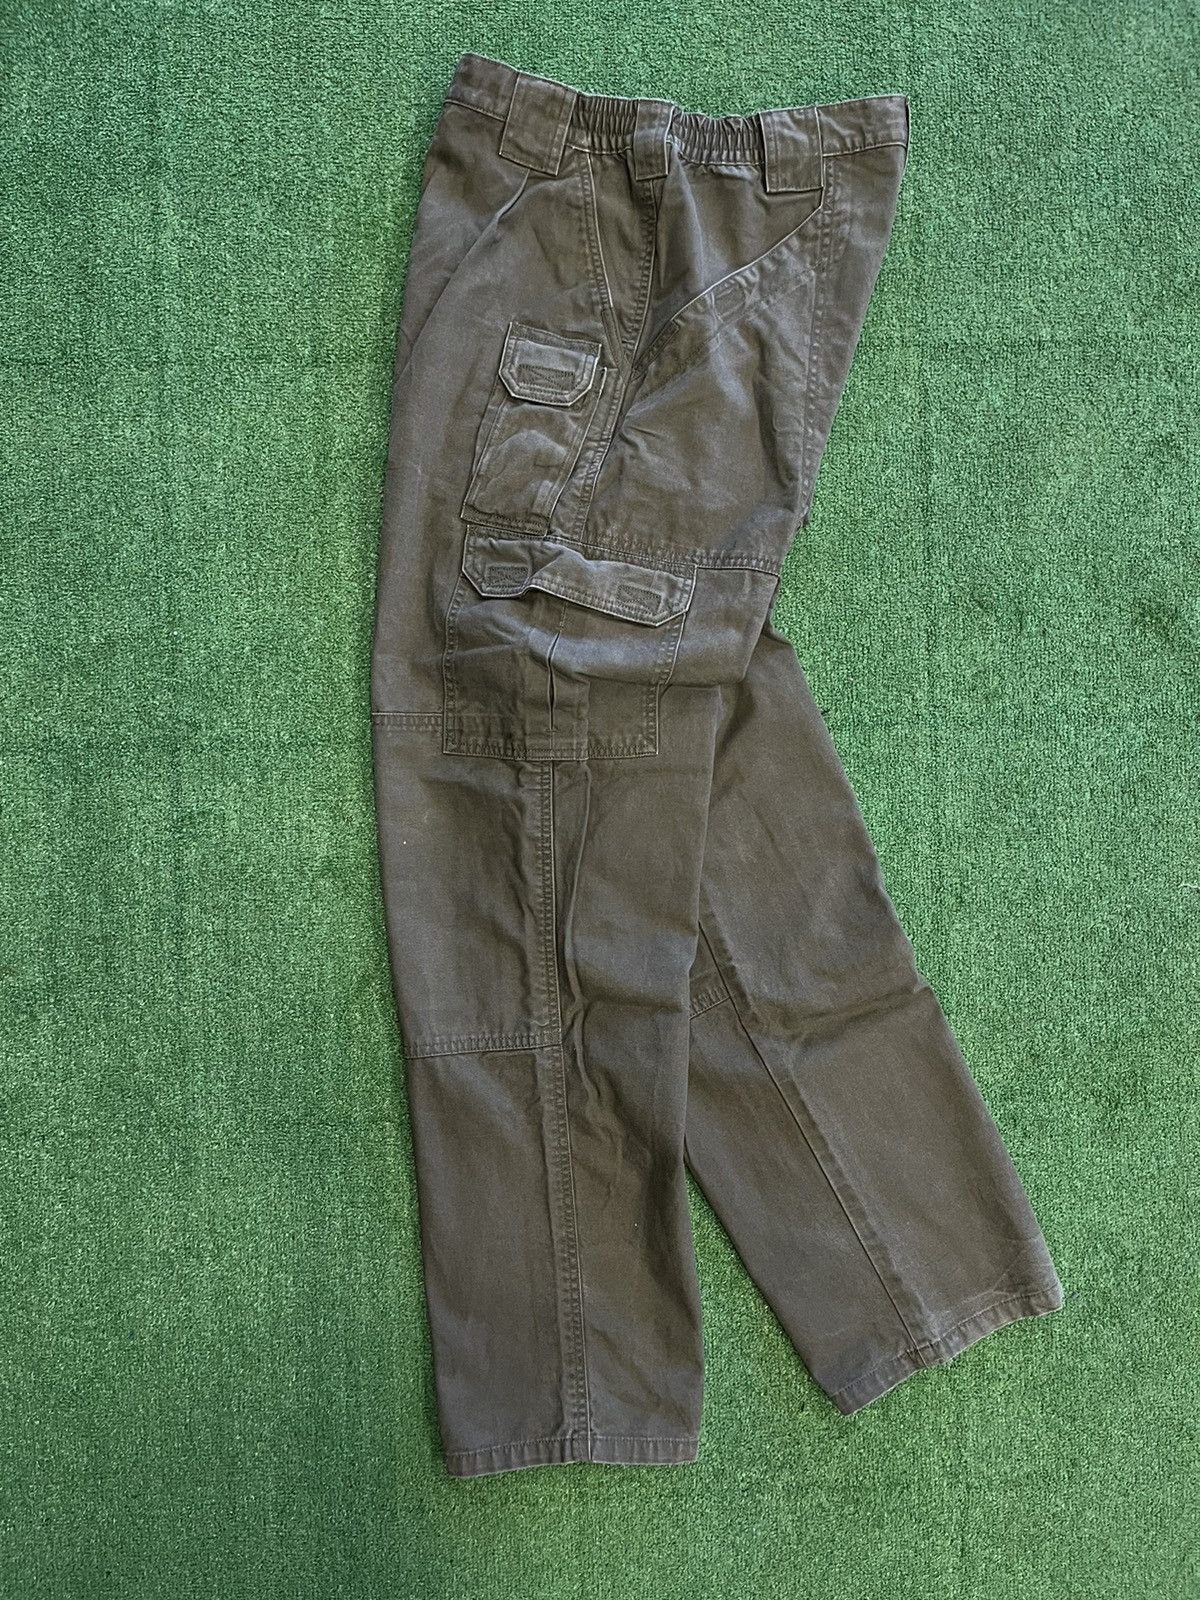 Pre-owned 5 11 X Vintage 5 11 Tactical Army Cargo Multi Pocket Pants Khaki